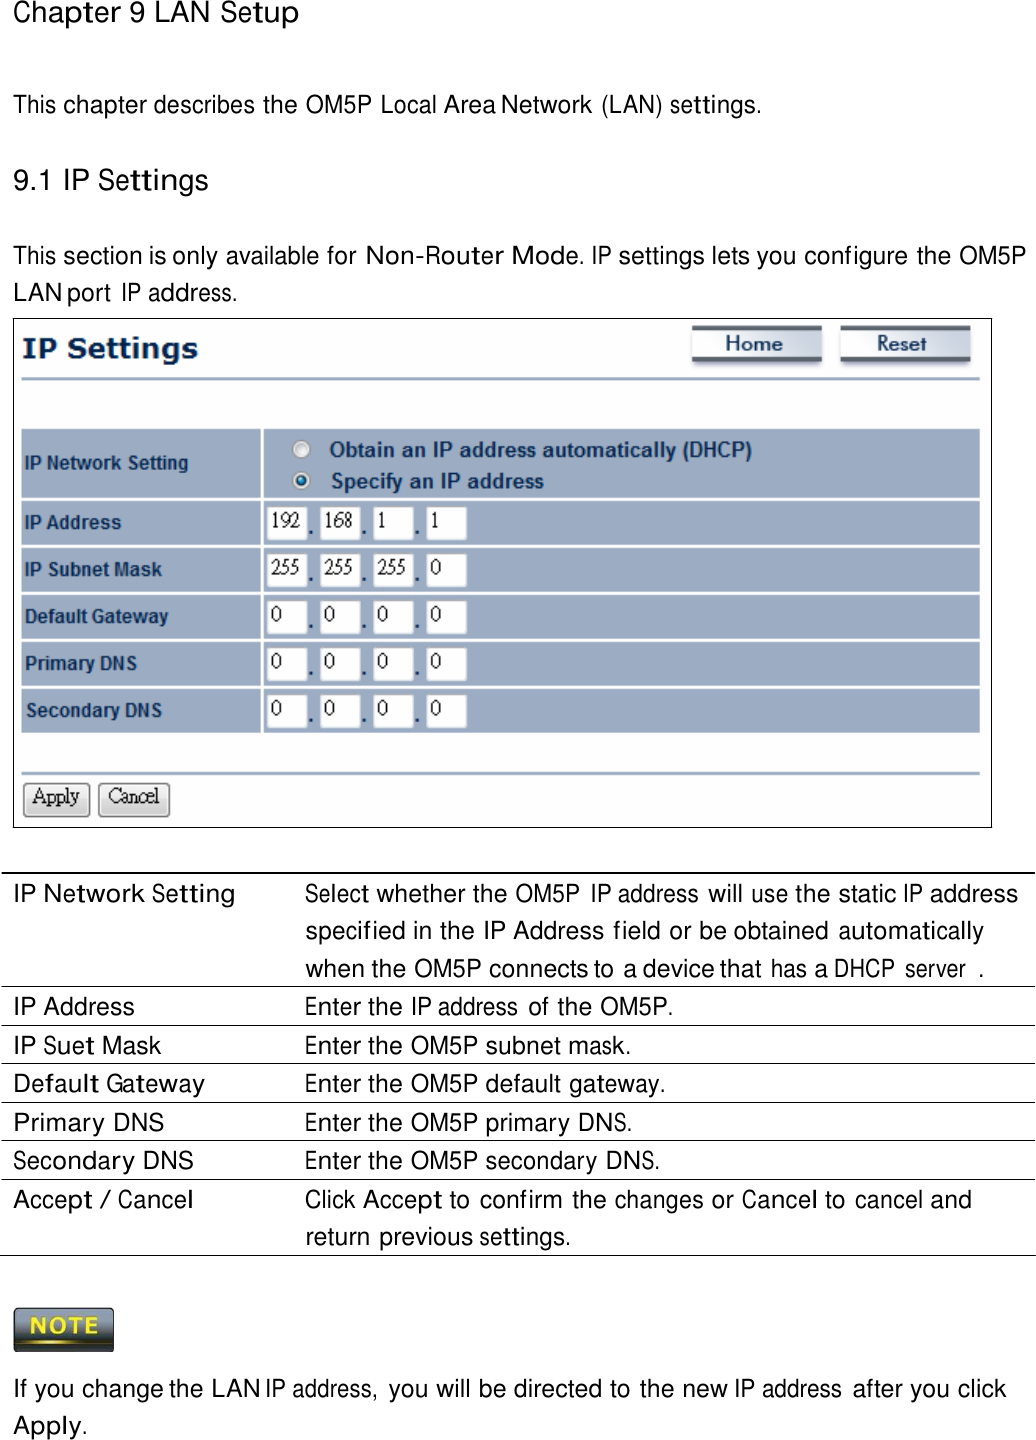 Chapter 9 LAN Setup     This chapter describes the OM5P Local Area Network (LAN) settings.   9.1 IP Settings   This section is only available for Non-Router Mode. IP settings lets you configure the OM5P LAN port IP address.                            IP Network Setting Select whether the OM5P  IP address will use the static IP address specif ied in the IP Address field or be obtained automatically when the OM5P connects to a device that has a DHCP  server  . IP Address  Enter the IP address of the OM5P. IP Suet Mask  Enter the OM5P subnet mask. Default Gateway Enter the OM5P default gateway. Primary DNS  Enter the OM5P primary DNS. Secondary DNS  Enter the OM5P secondary DNS. Accept / Cancel Click Accept to confirm the changes or Cancel to cancel and return previous settings.      If you change the LAN IP address, you will be directed to the new IP address after you click Apply. 